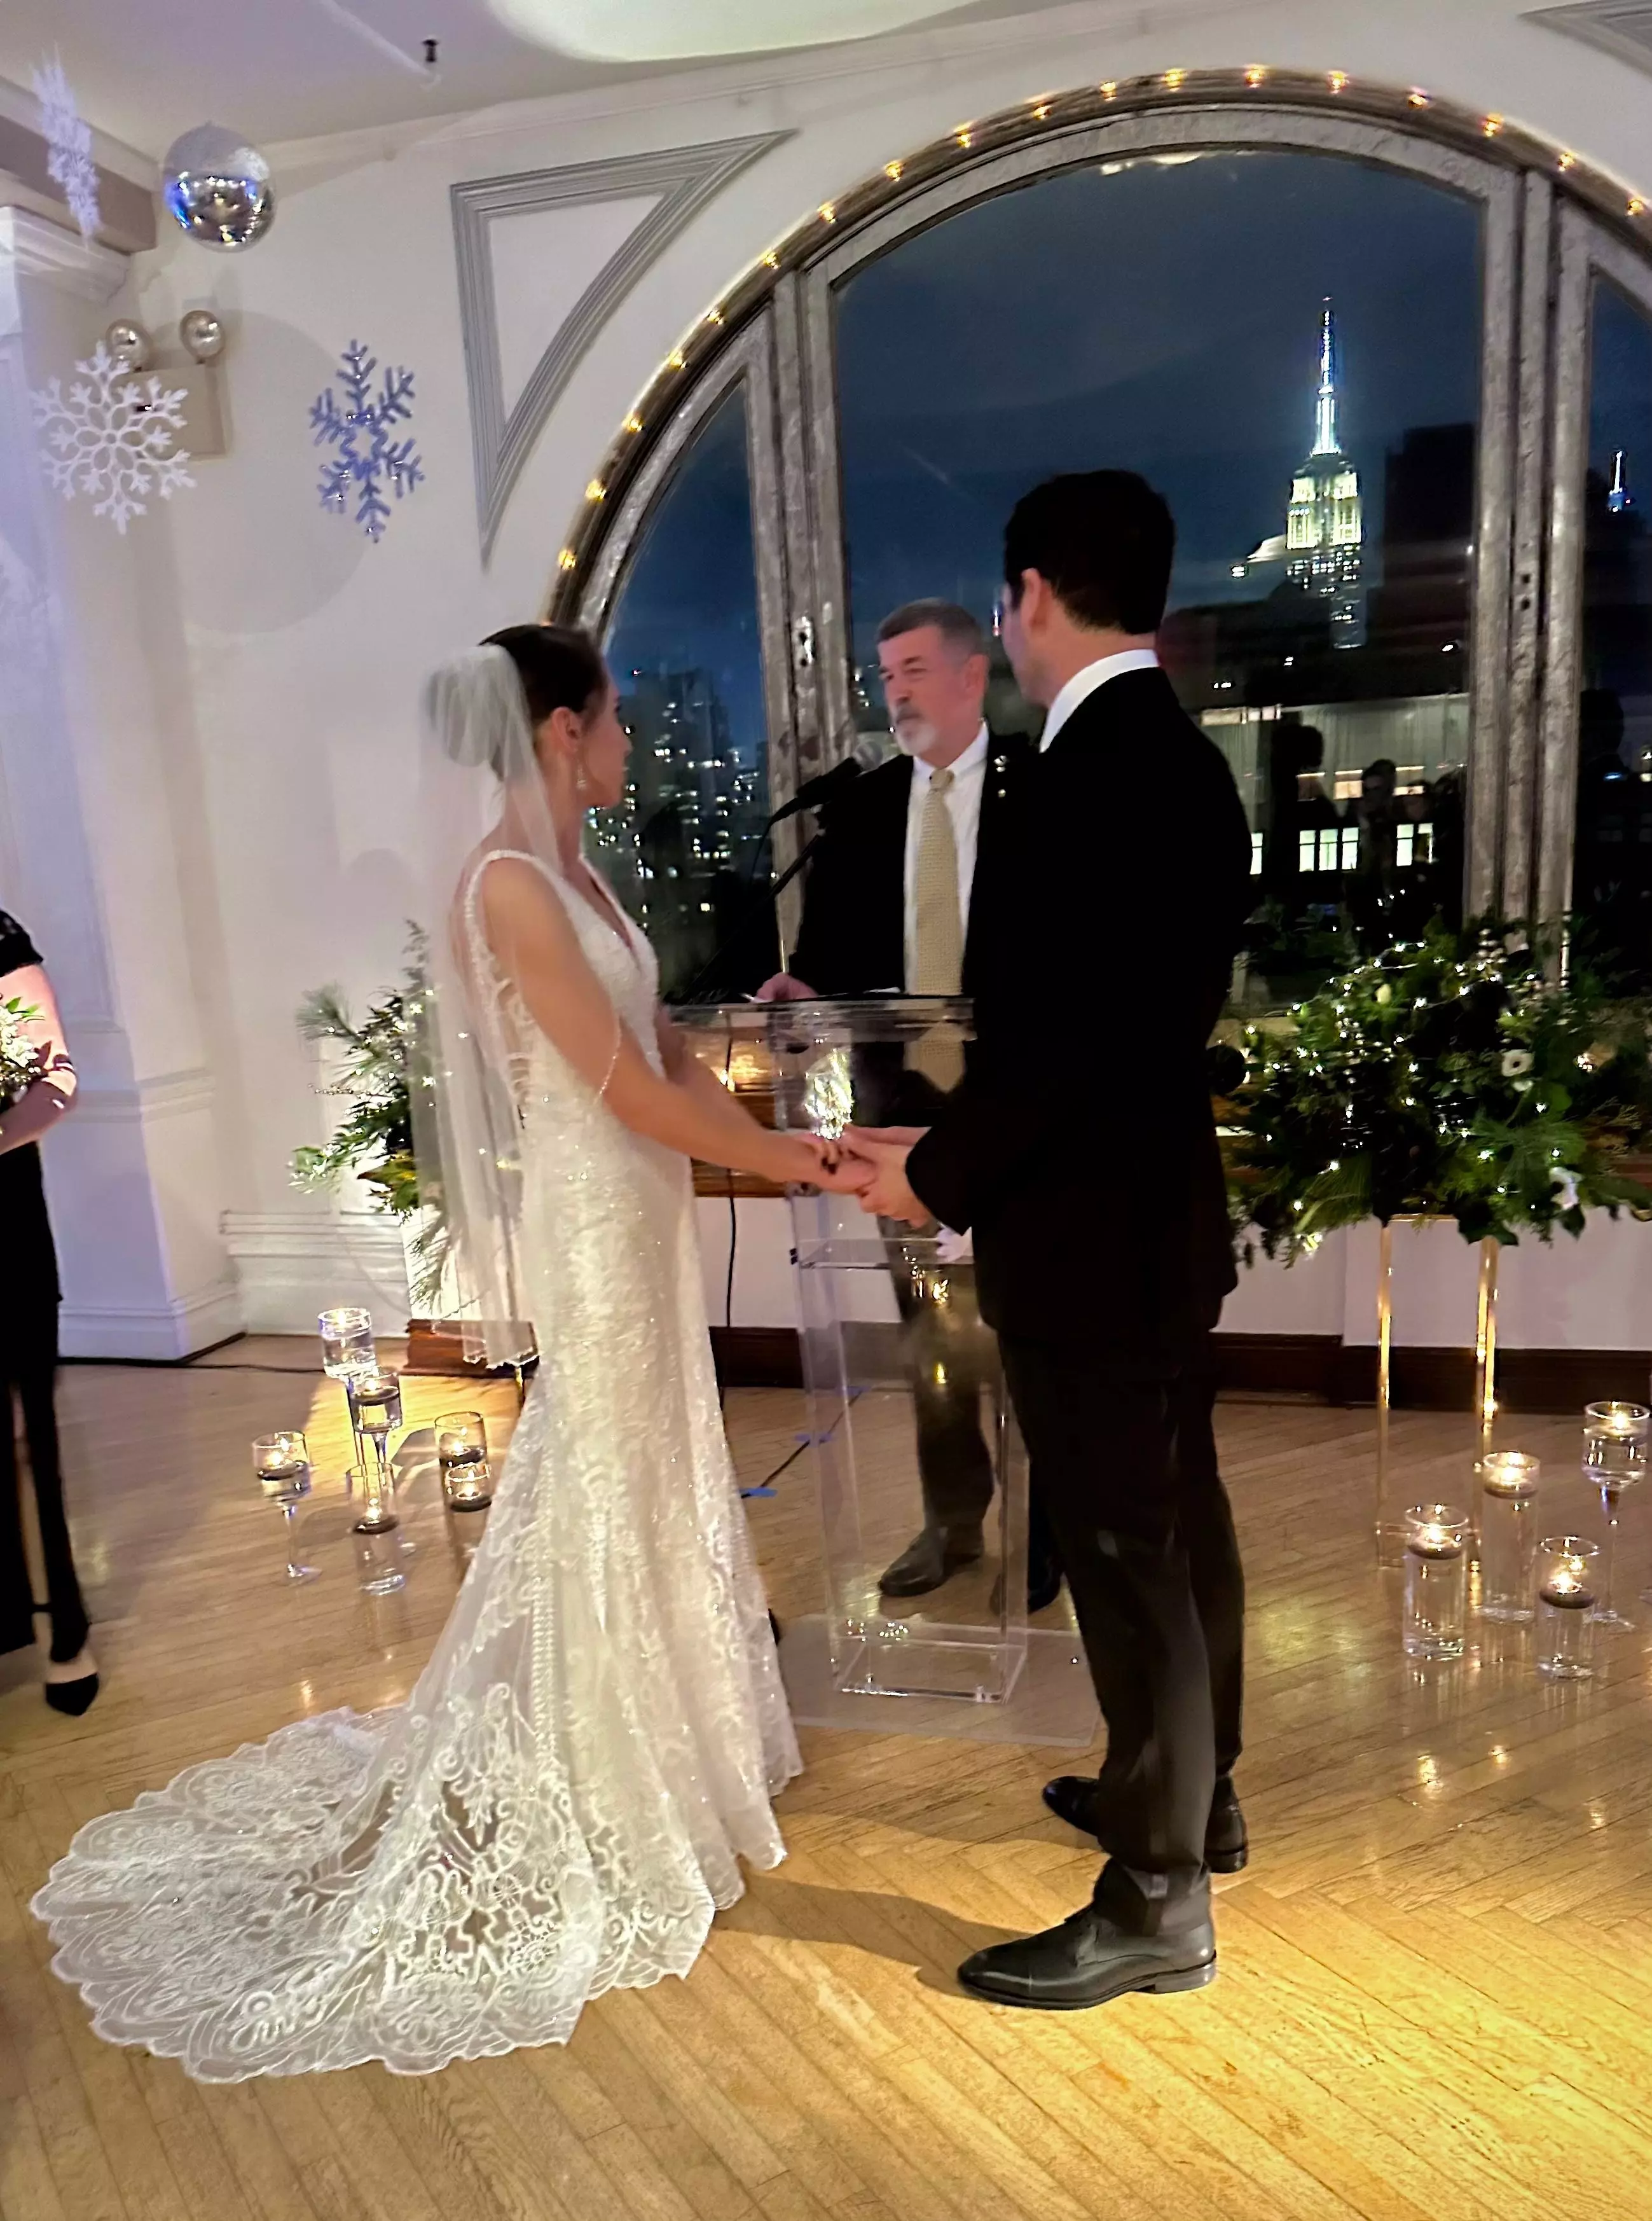 Daphne Haraburd and Daniel Tegnelia flew from Los Angeles to New York City for their wedding.